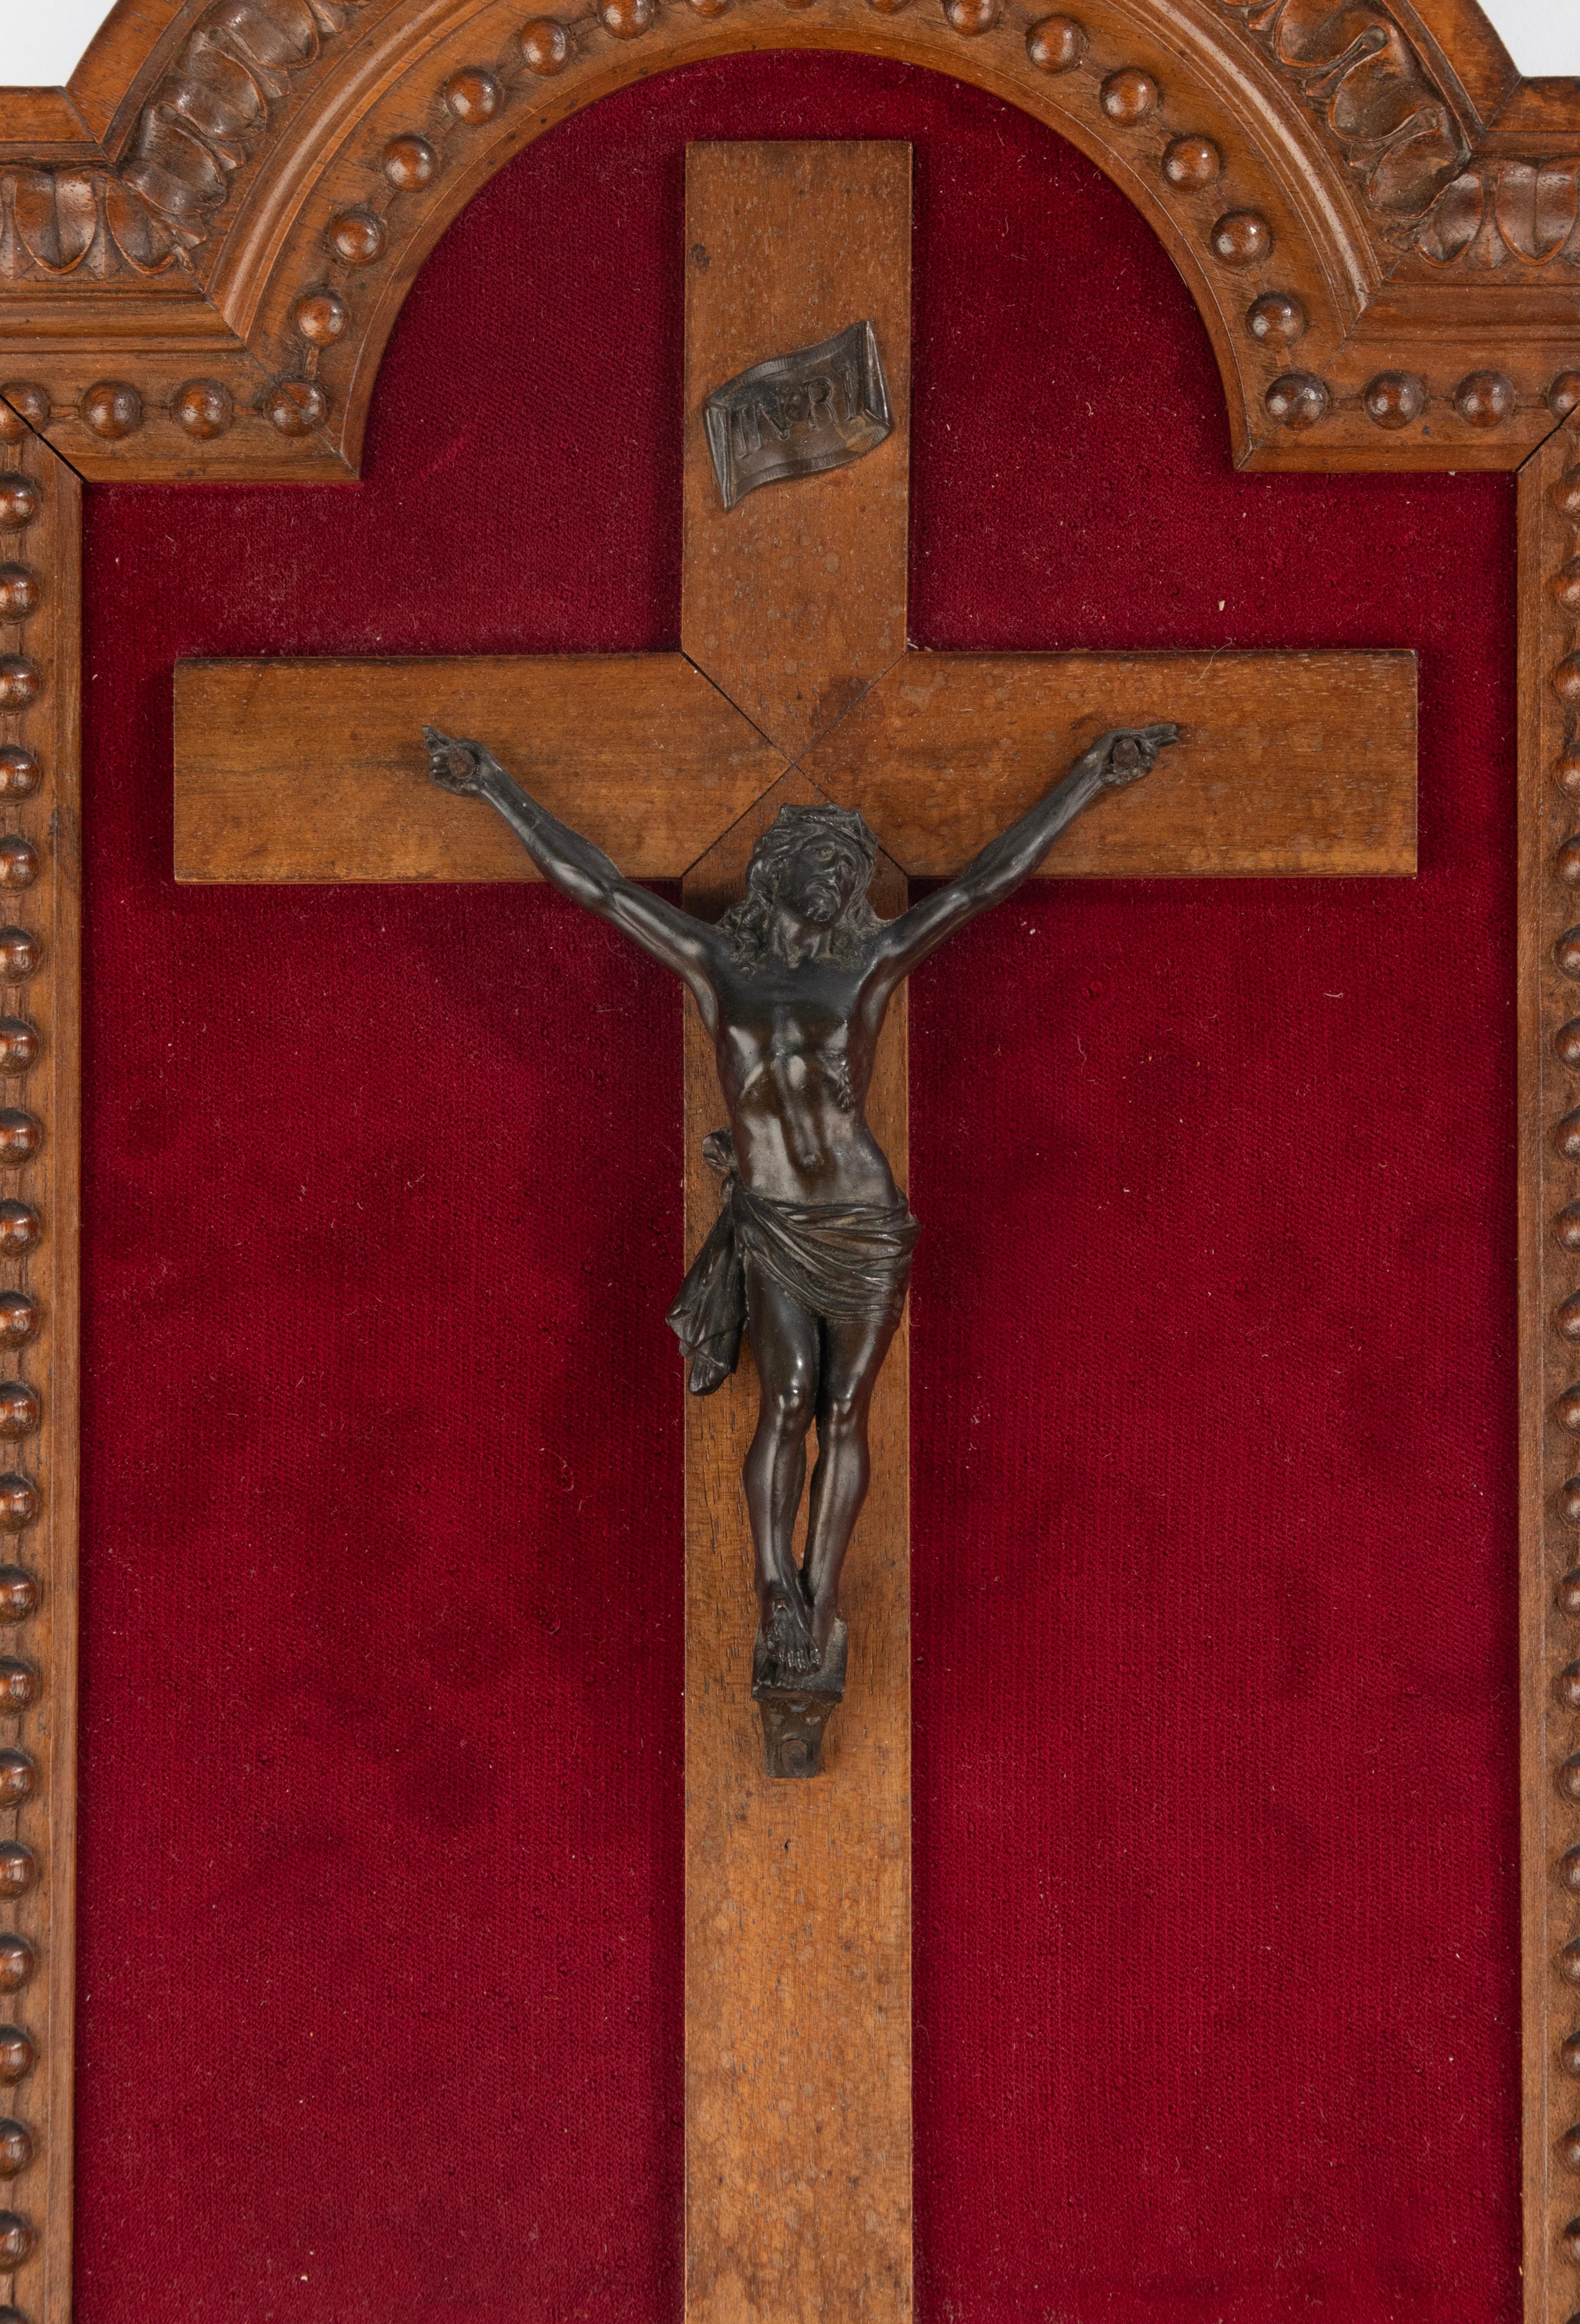 A beautiful bronze figure of Jesus Christ, a Corpus Christi. It hangs on a walnut cross, the frame is also made of walnut, with fine carvings. 
This piece dates from circa 1890. It is in very good condition, the bronze has a beautiful antique